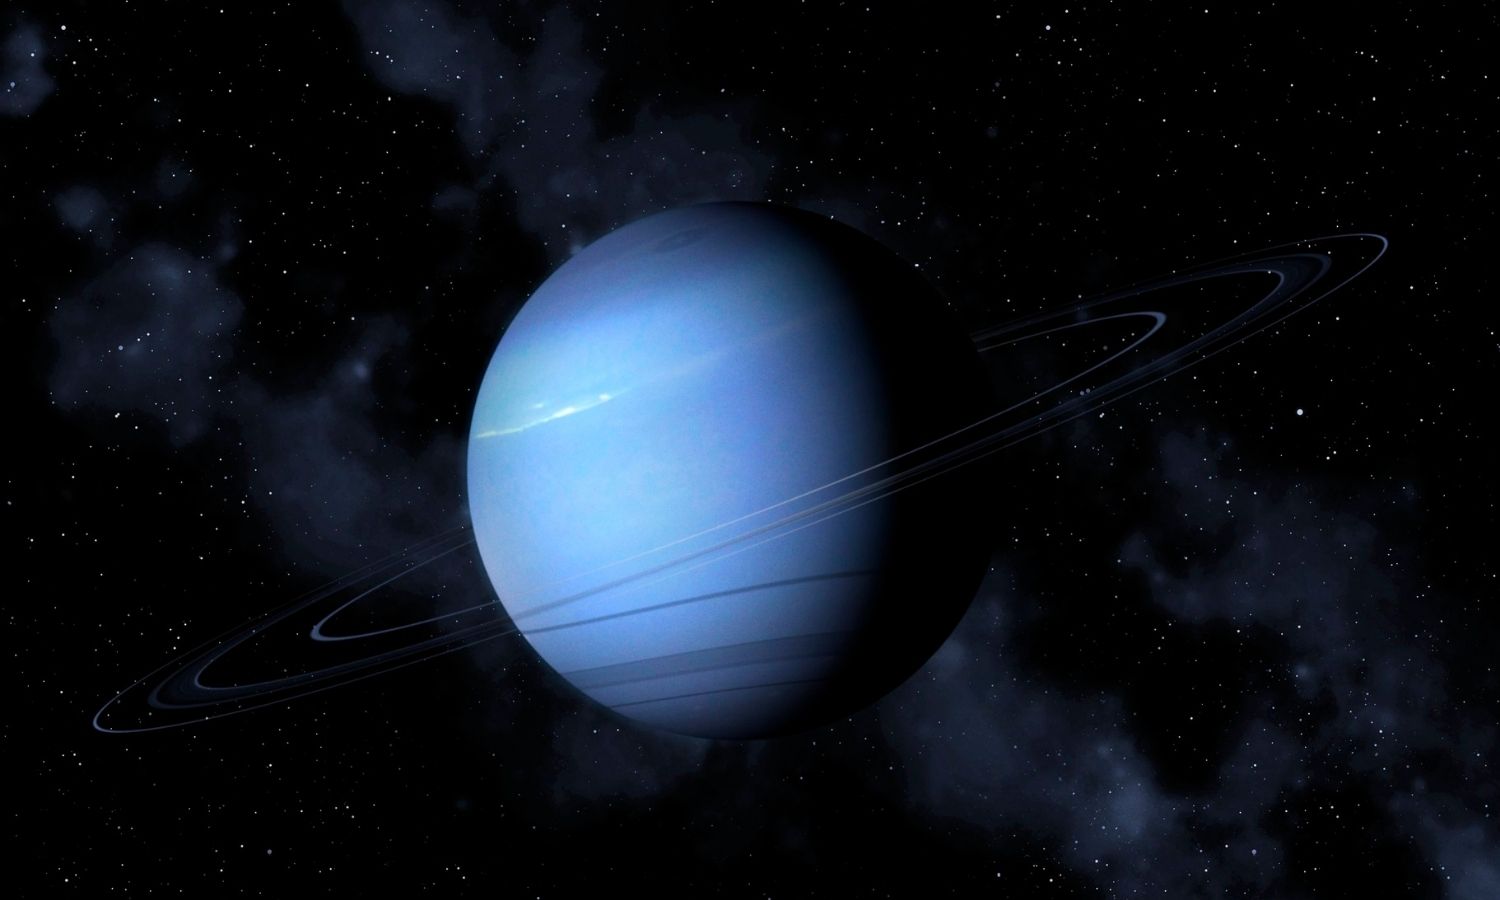 OTD in 1989: The rings of Neptune were discovered.